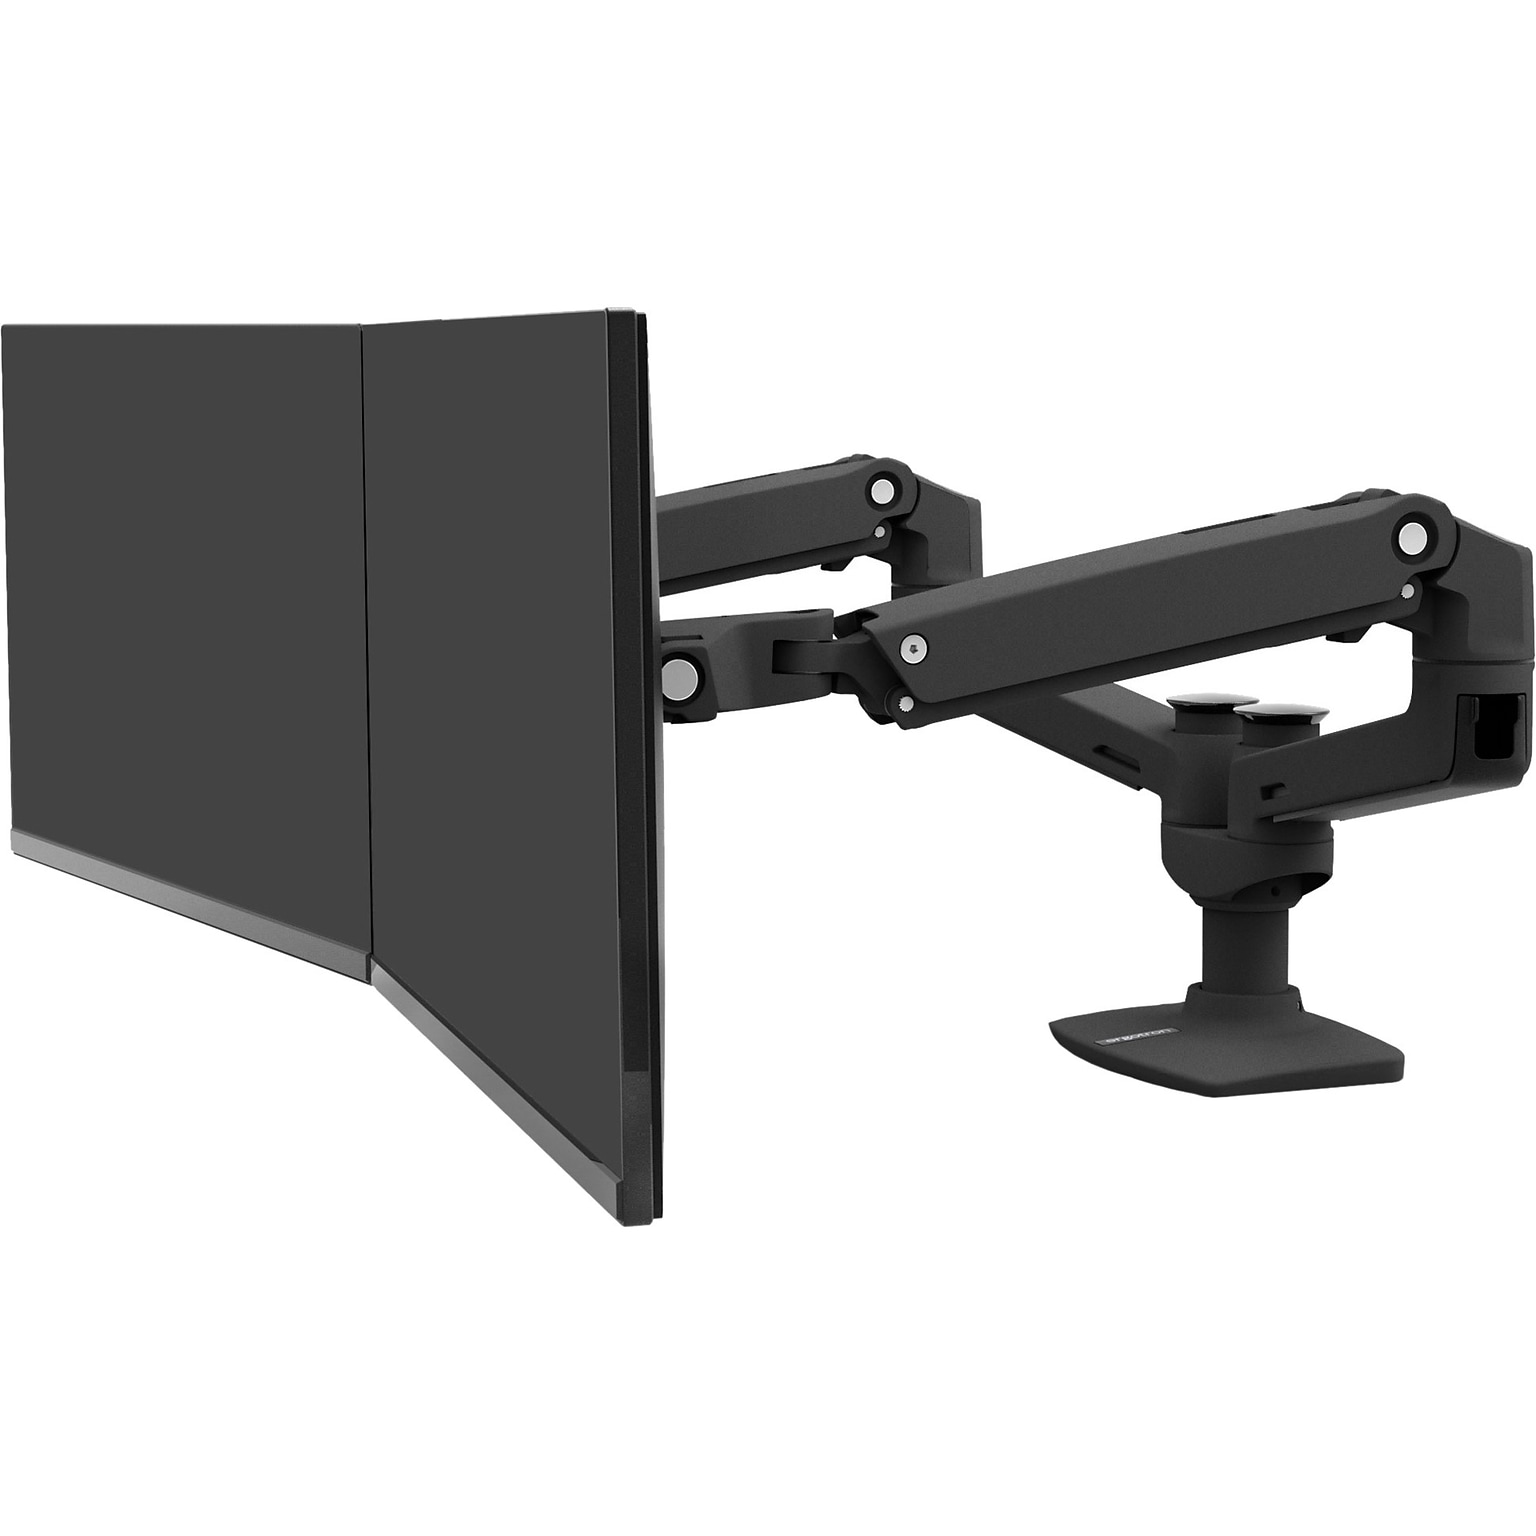 Ergotron LX Adjustable Dual Side-by-Side Mounting Arm, 27 Screen Support, Matte Black (45245224)